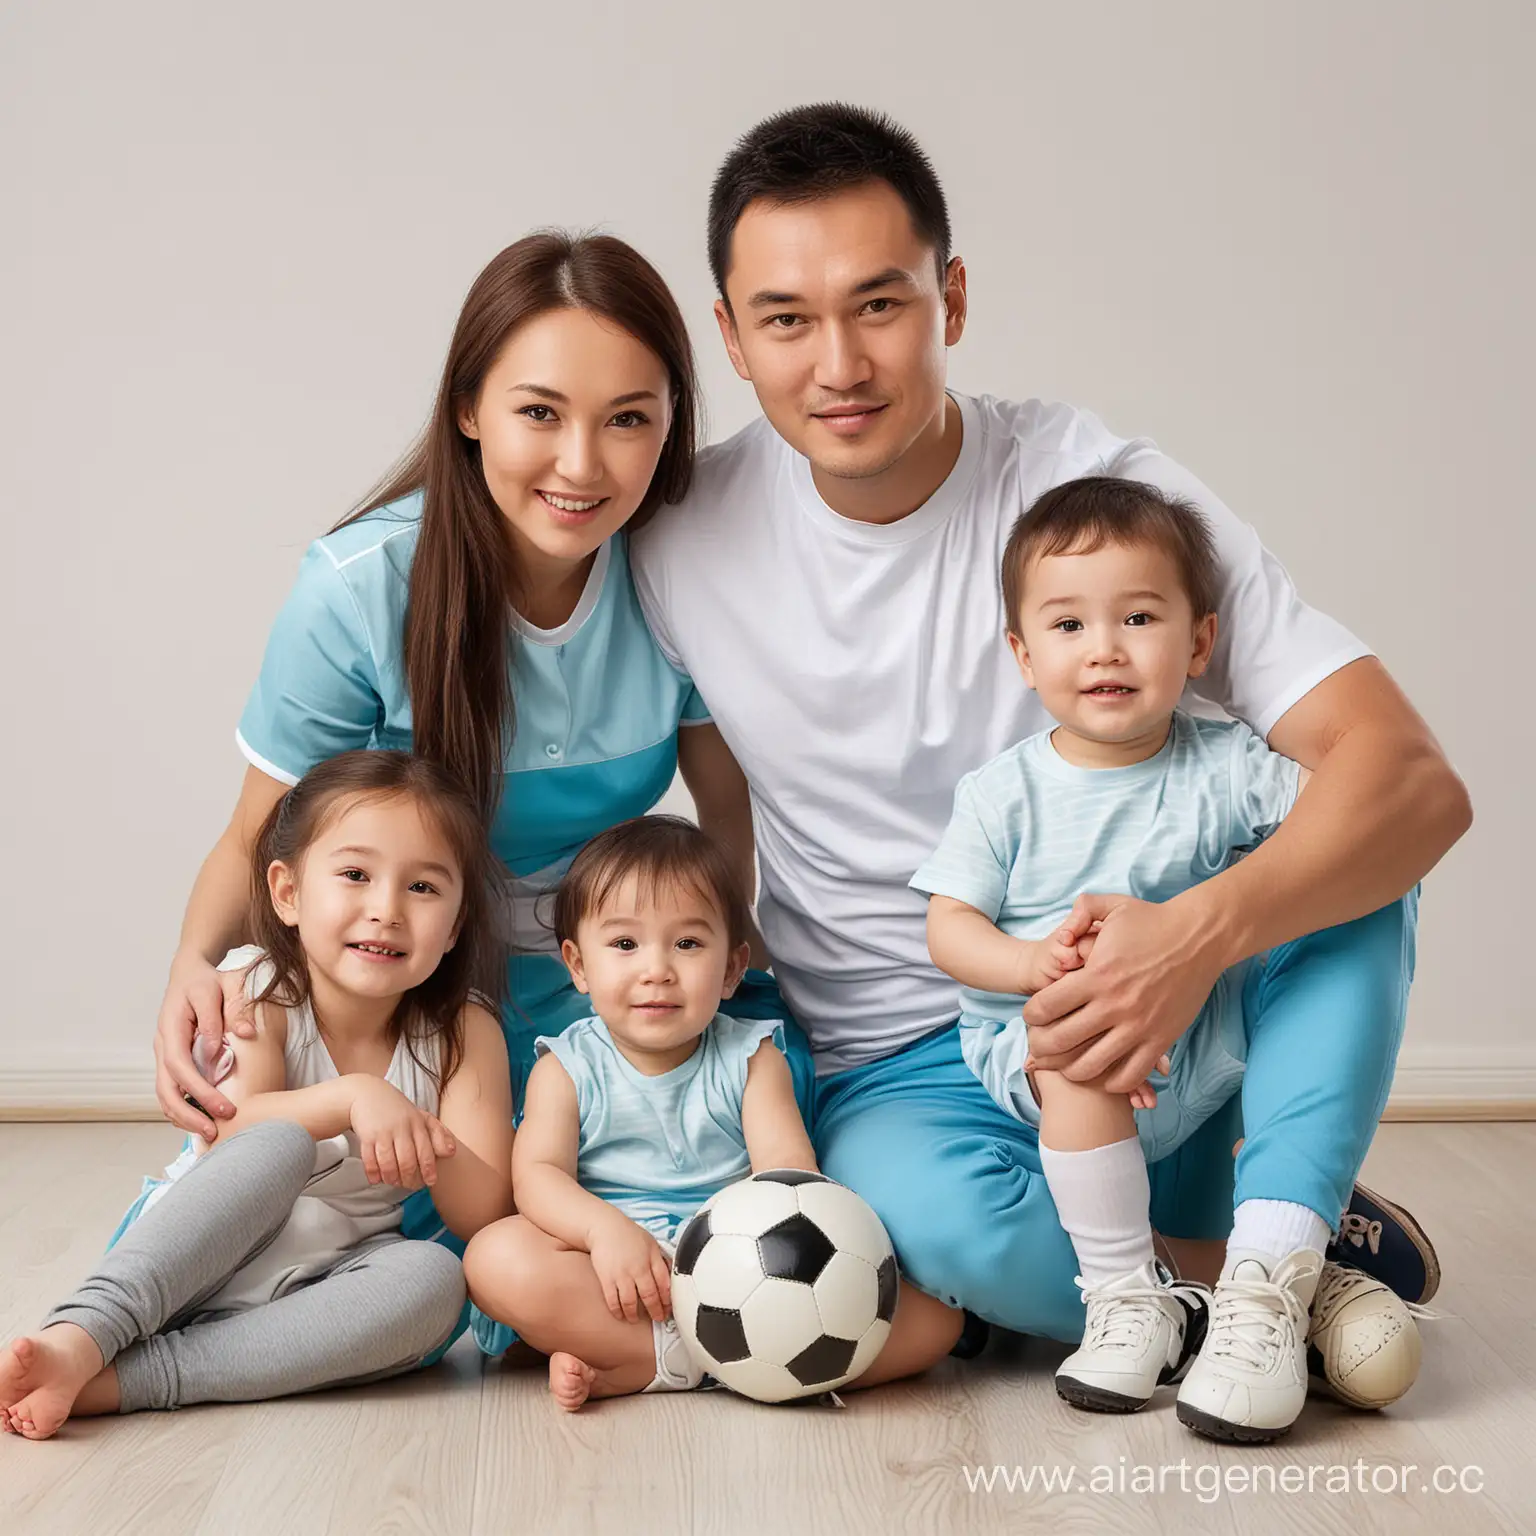 Kazakh-Family-Sitting-Together-with-Football-Ball-on-White-Background